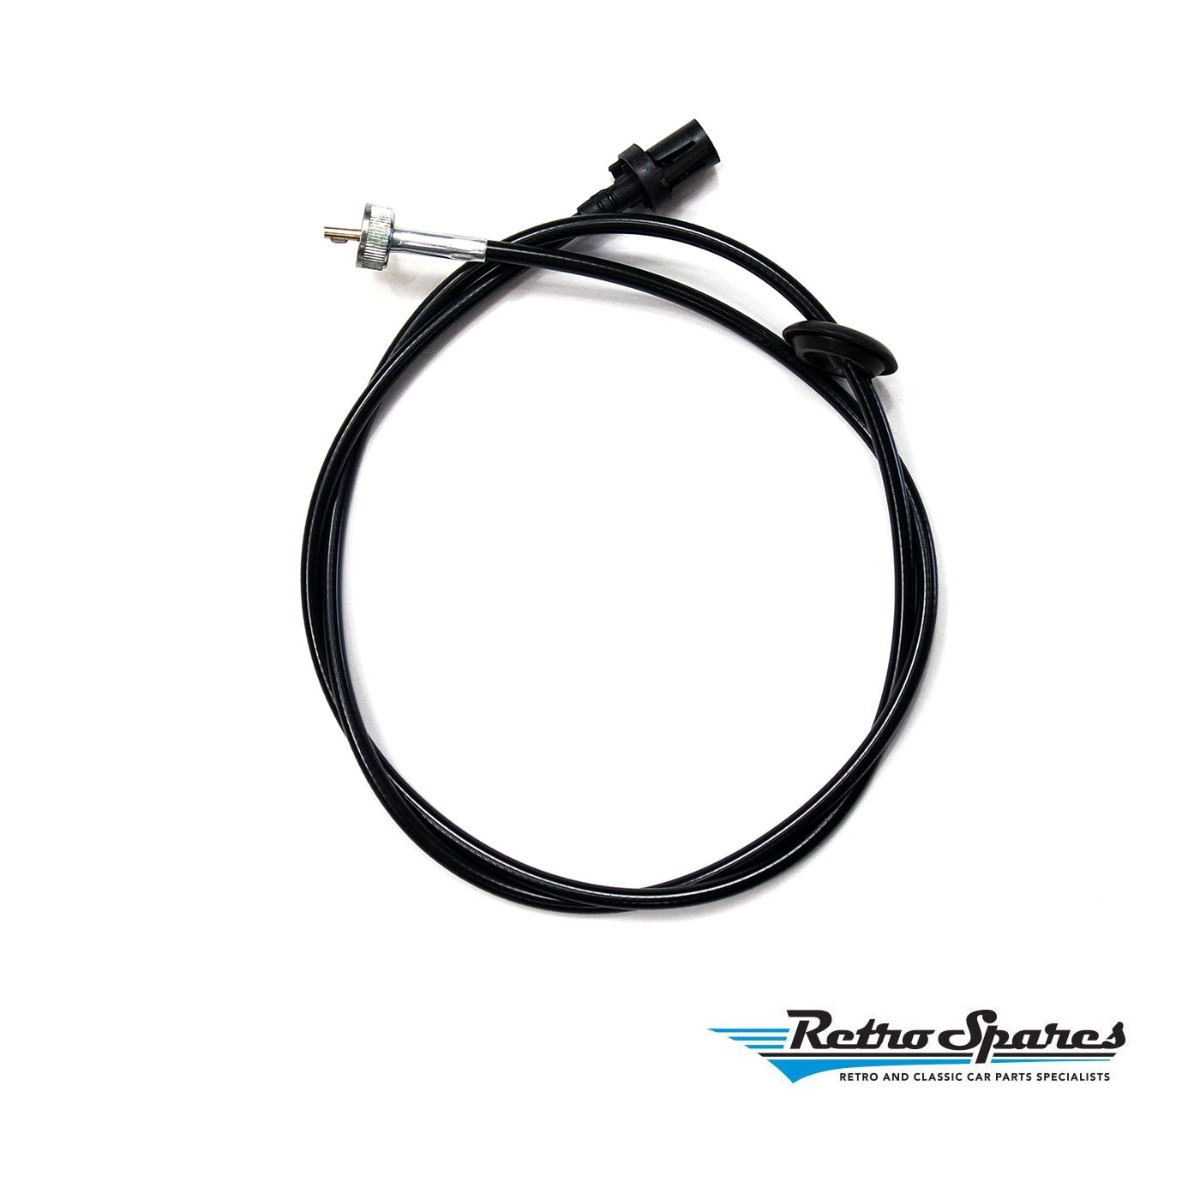 HOLDEN HQ-WB-LH-UC TO CELICA 5 SPEED SPEEDO CABLE